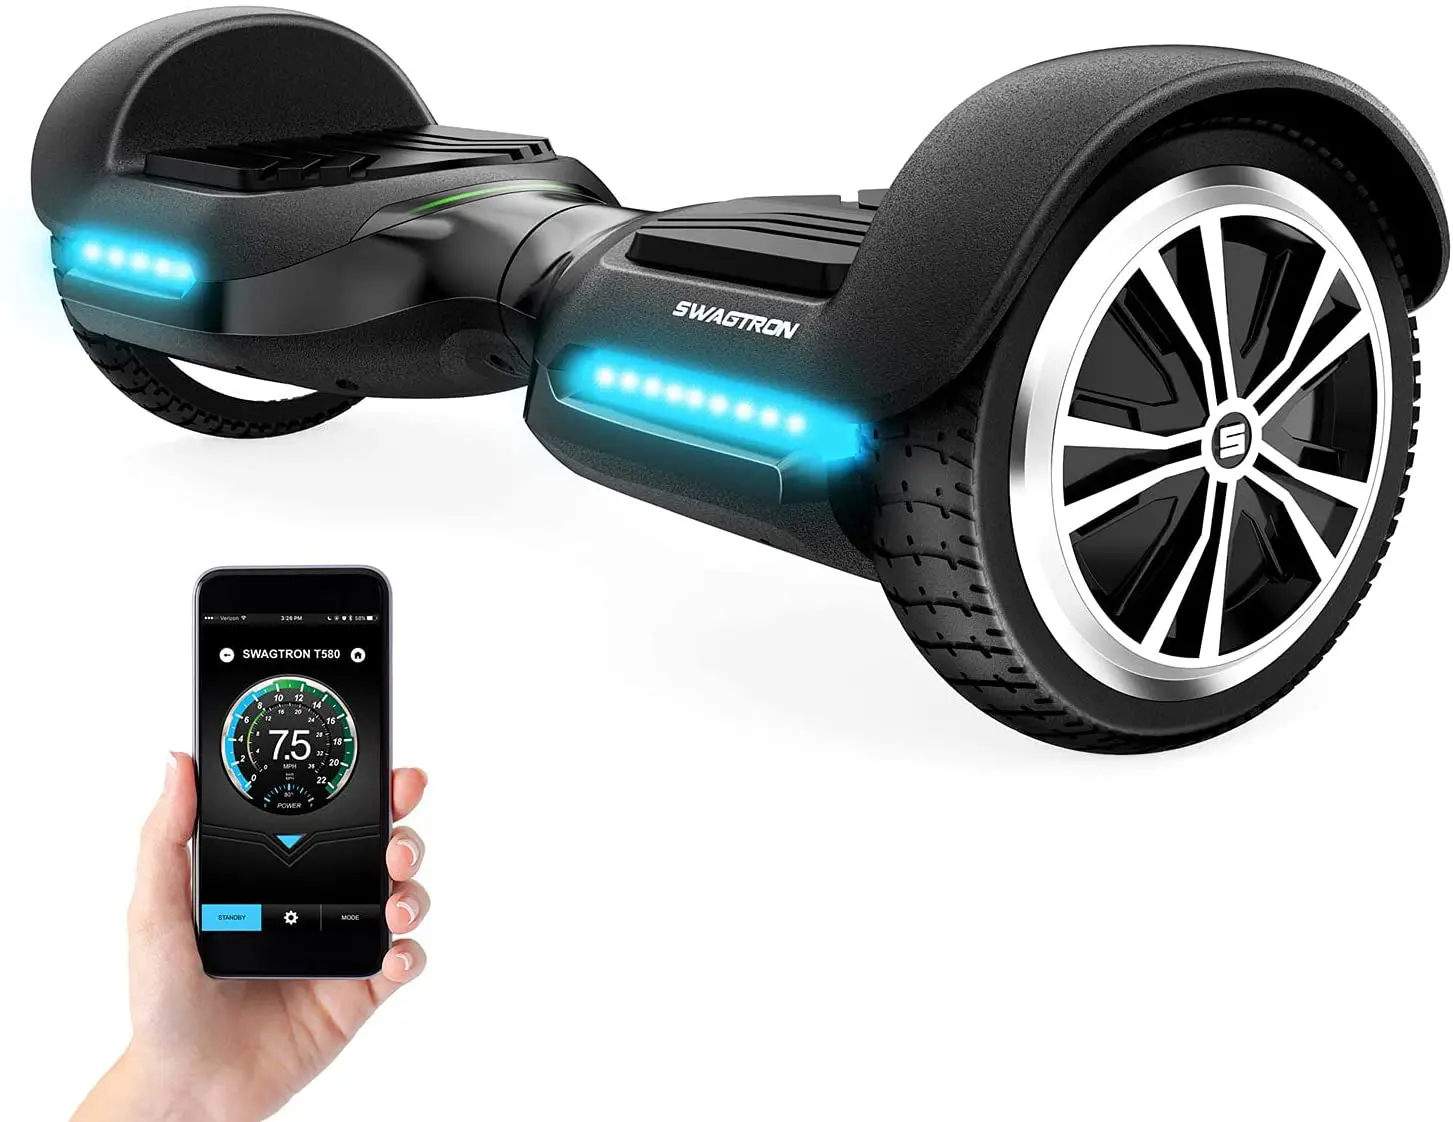 Swagtron T580 Affordable Hoverboard